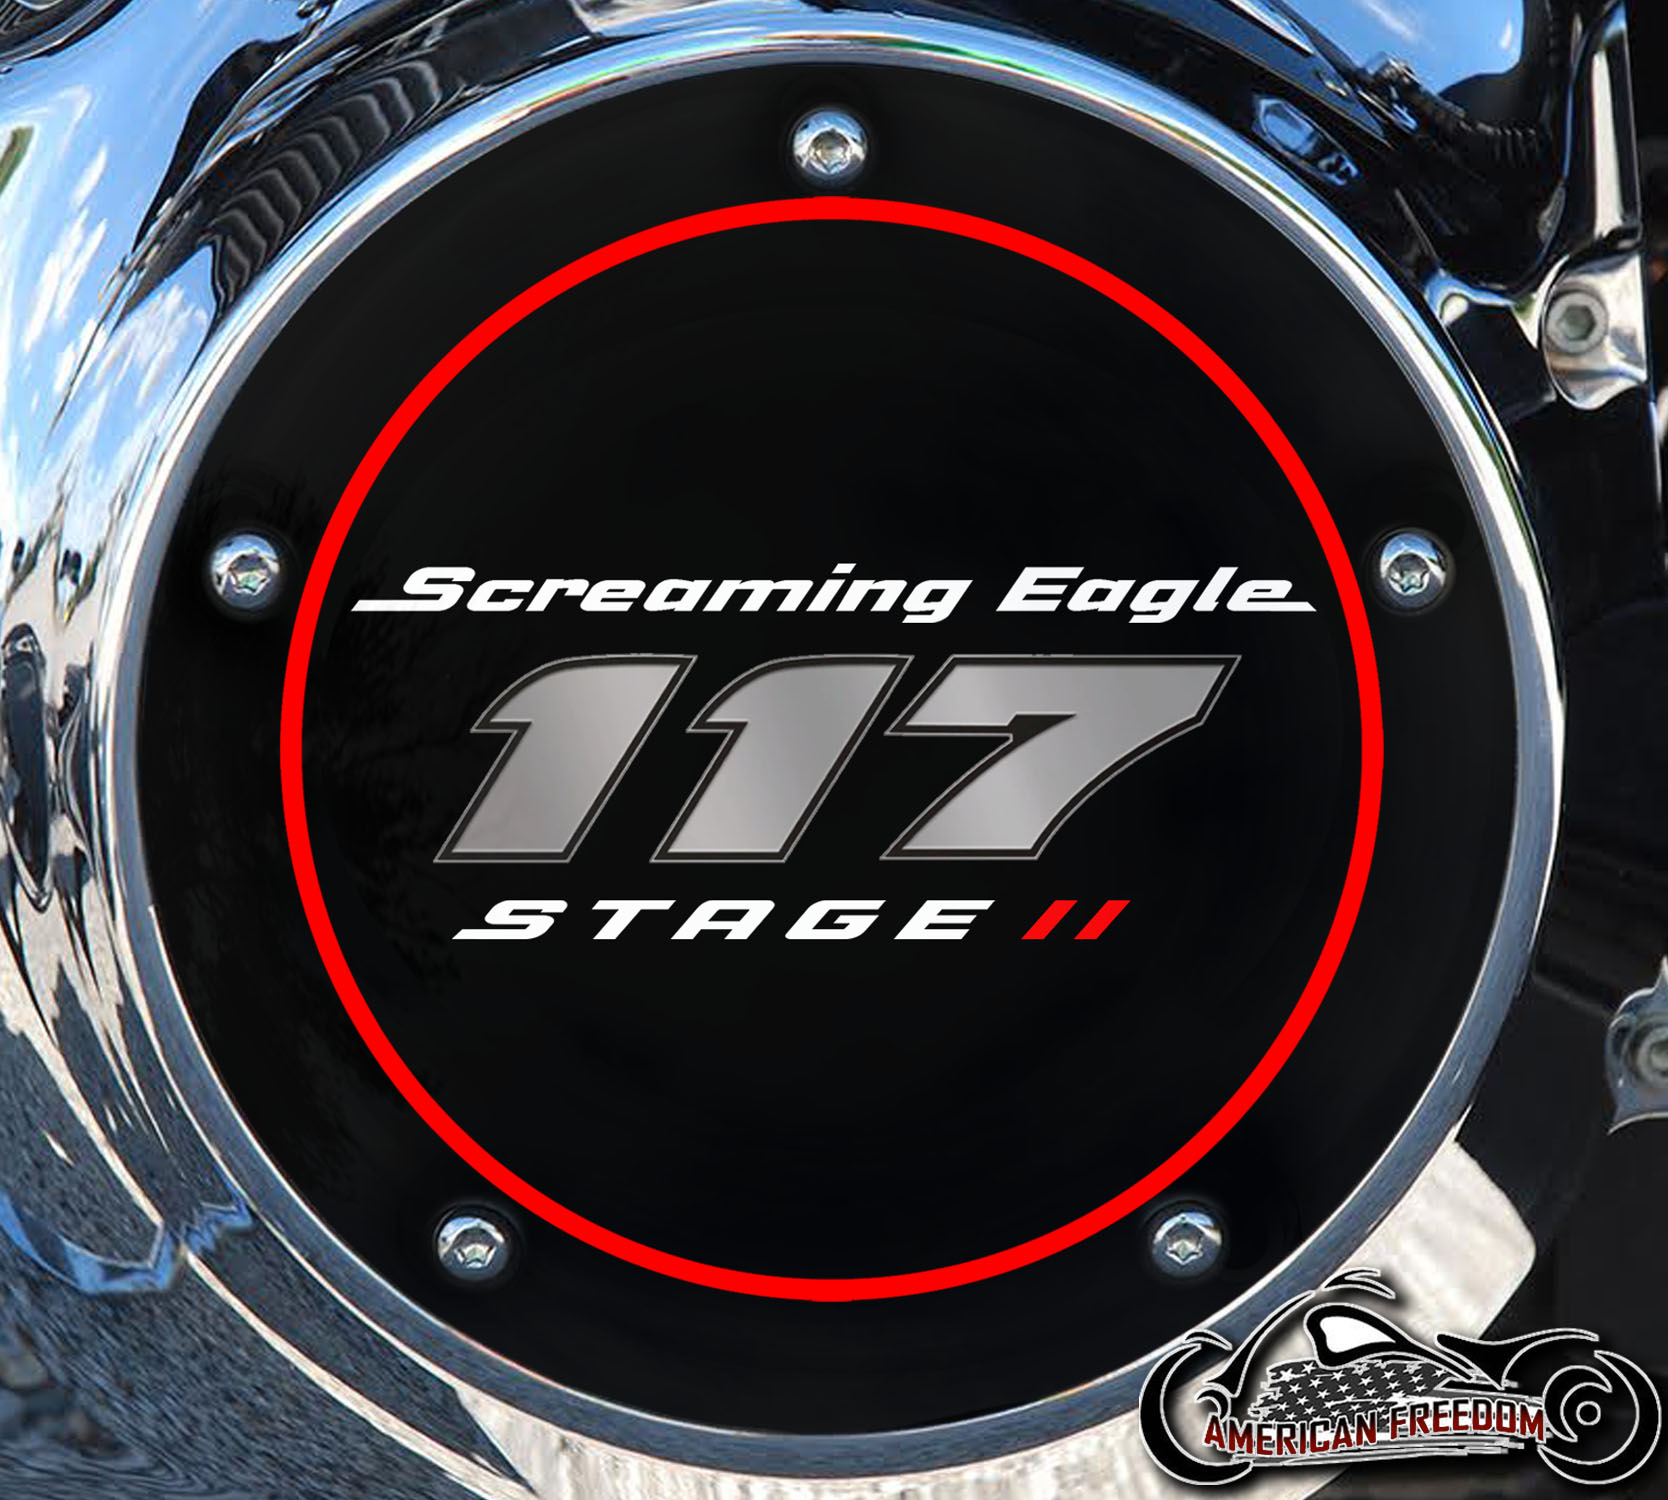 Screaming Eagle Stage II 117 Derby Cover Red Ring